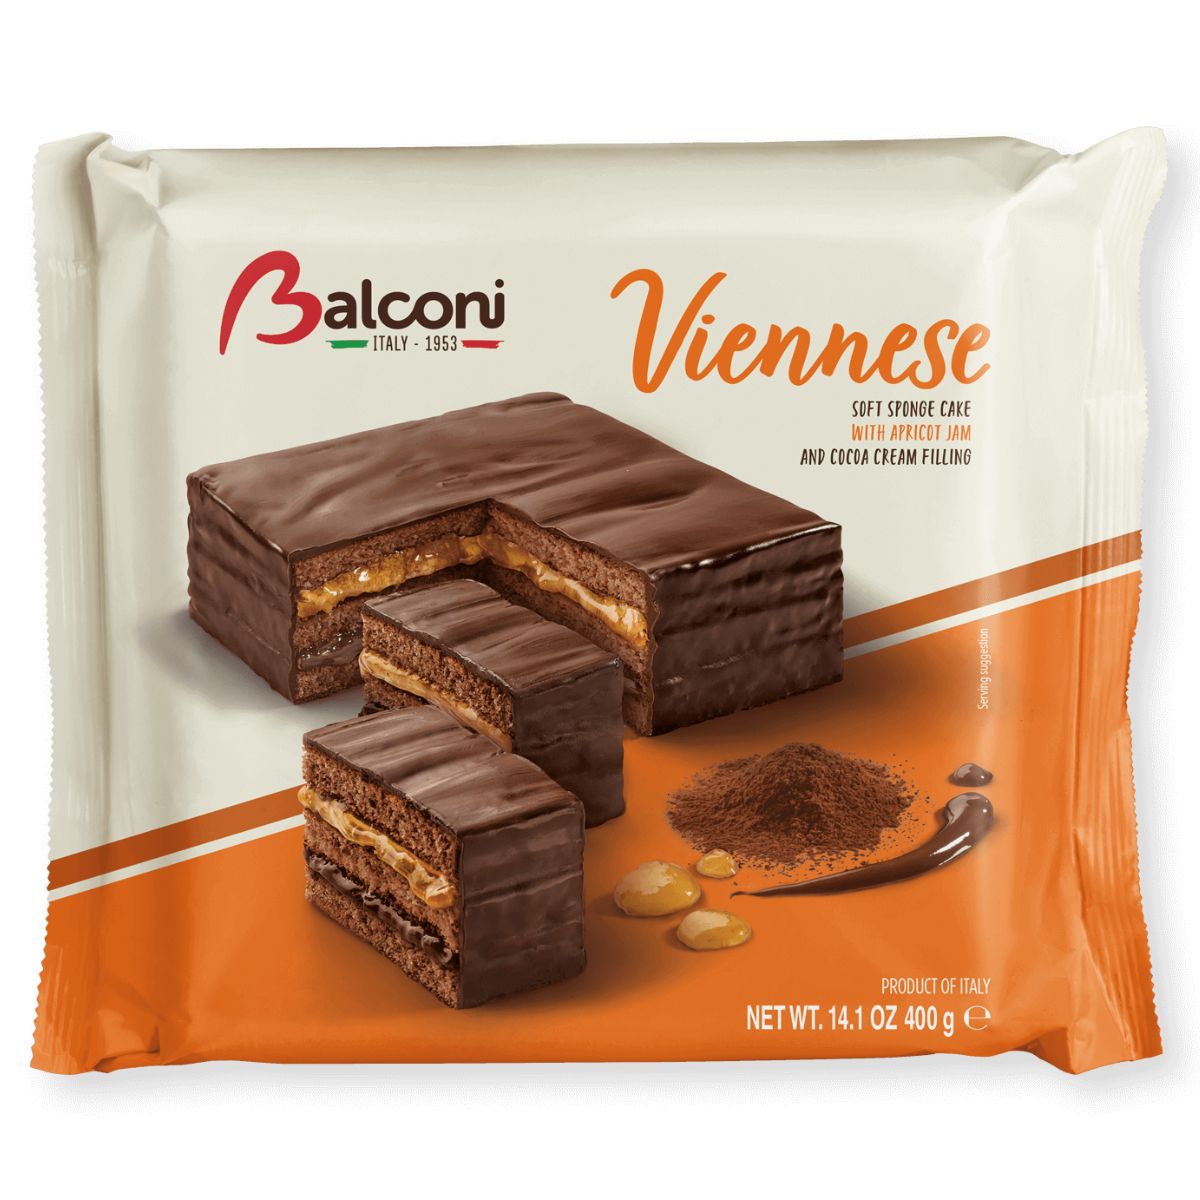 A package of Balconi - Viennese Cake - 400g chocolate cake.